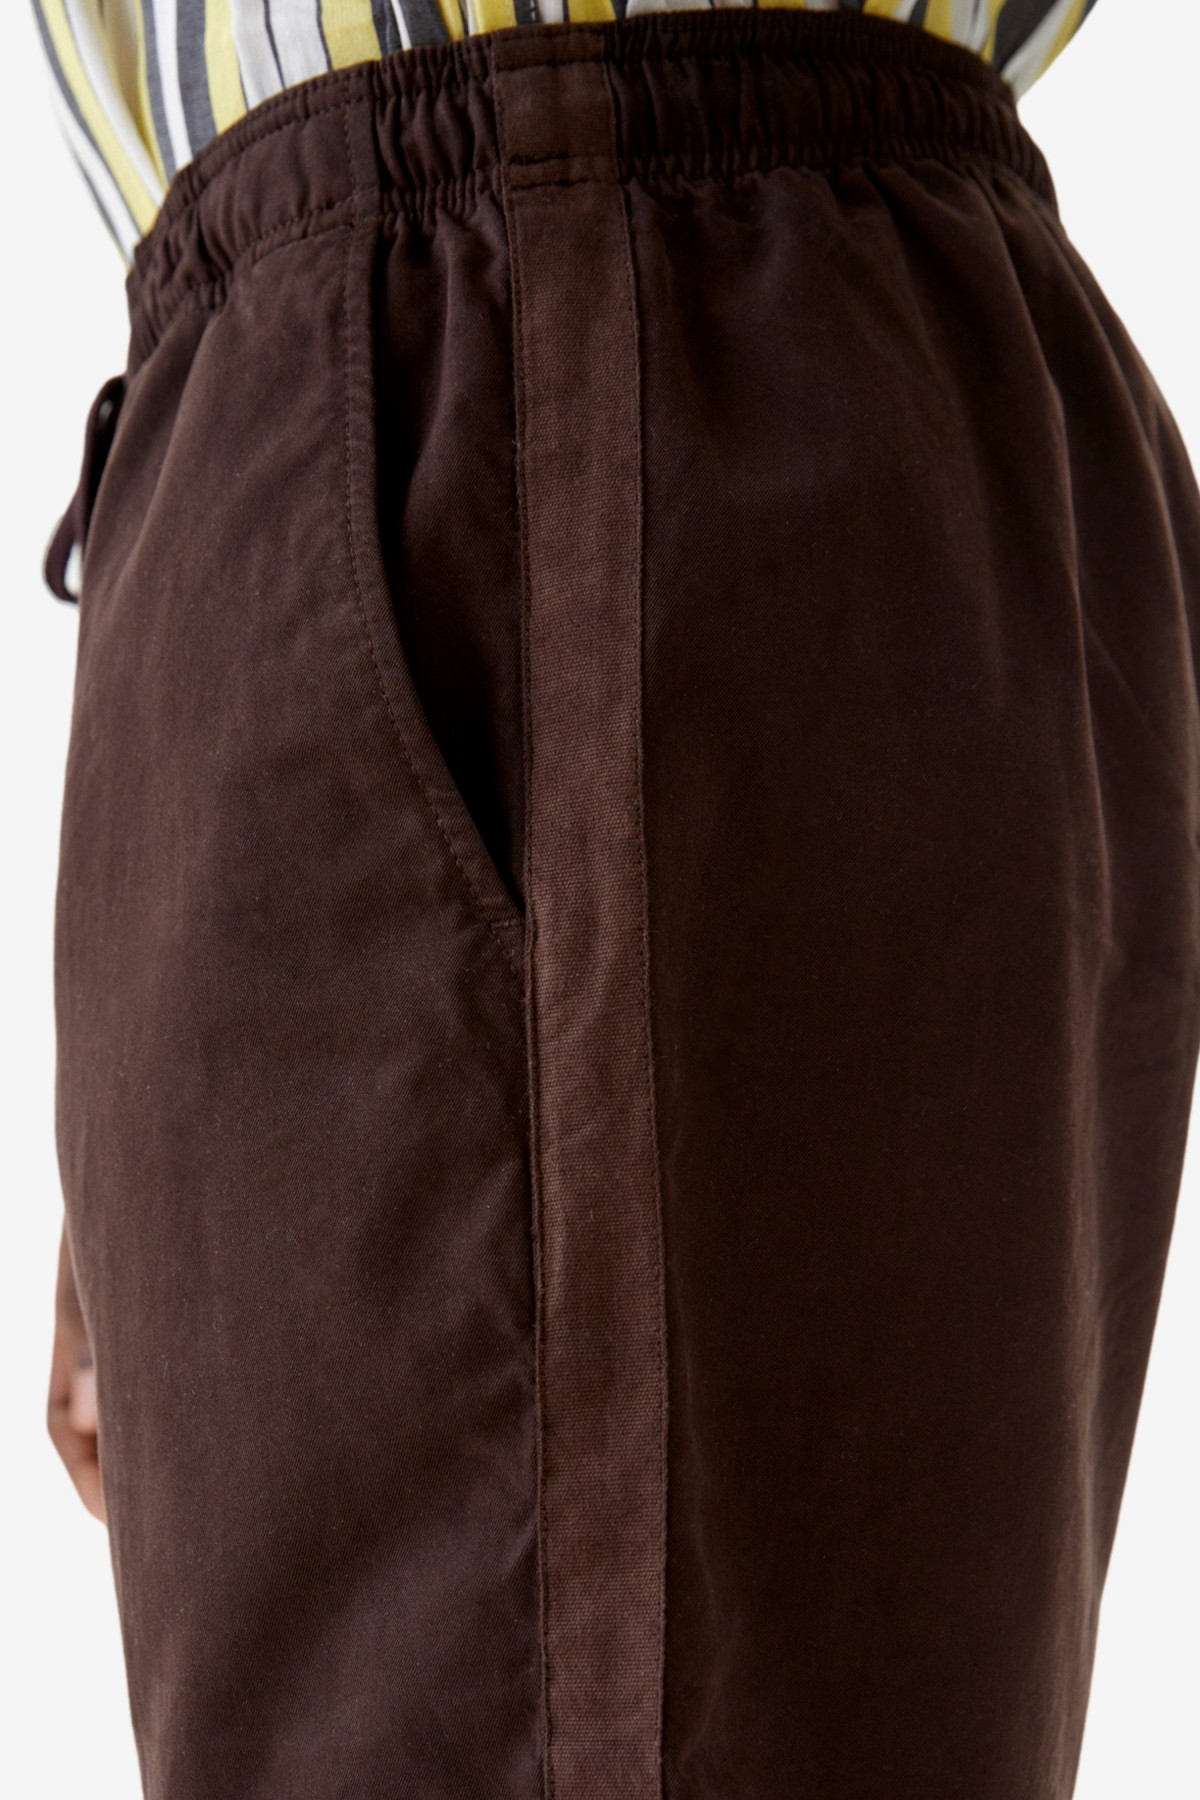 Schnayderman’s Shorts Twill Gd in Chocolate